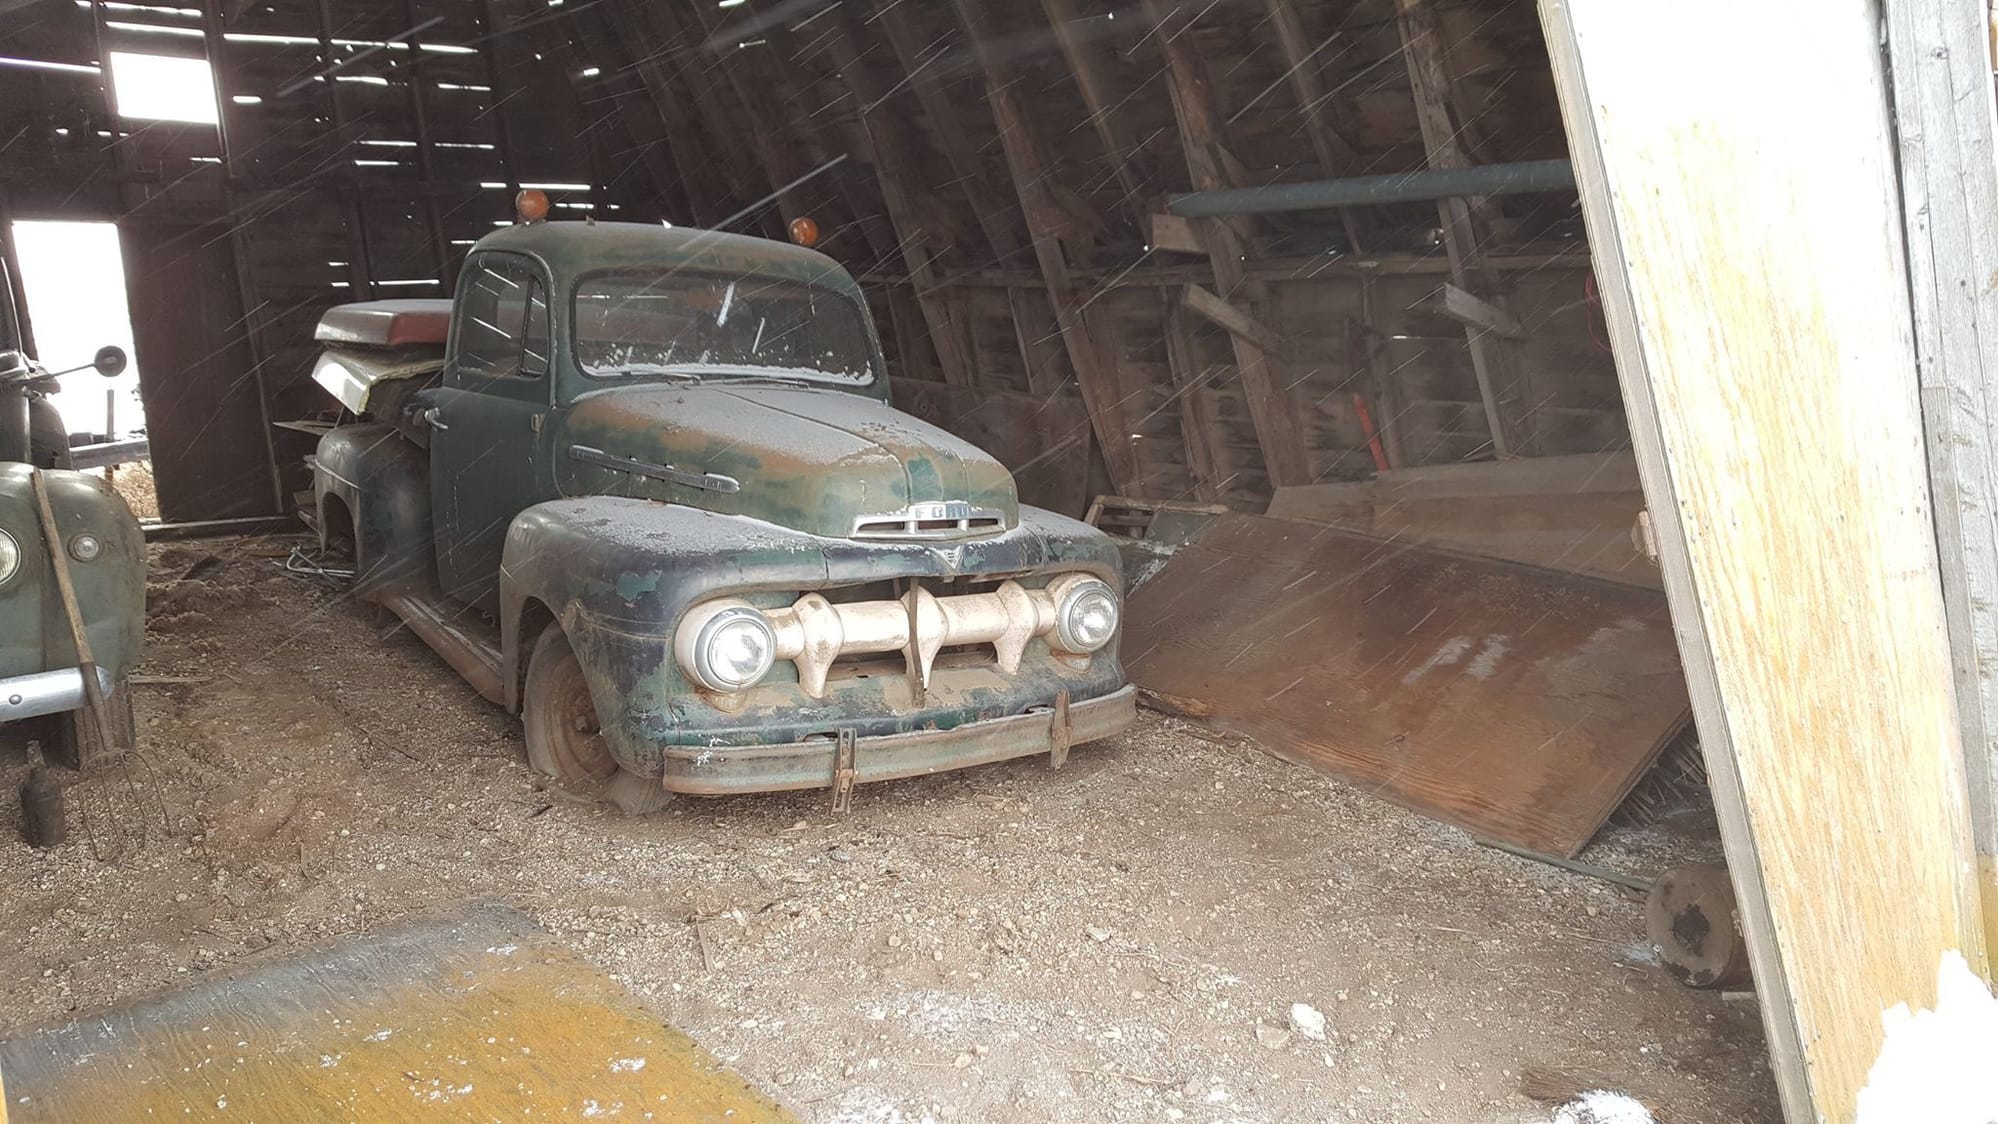 Derelict Abandoned Junkyard Truck Pic Thread Page 34 Ford Truck 6829